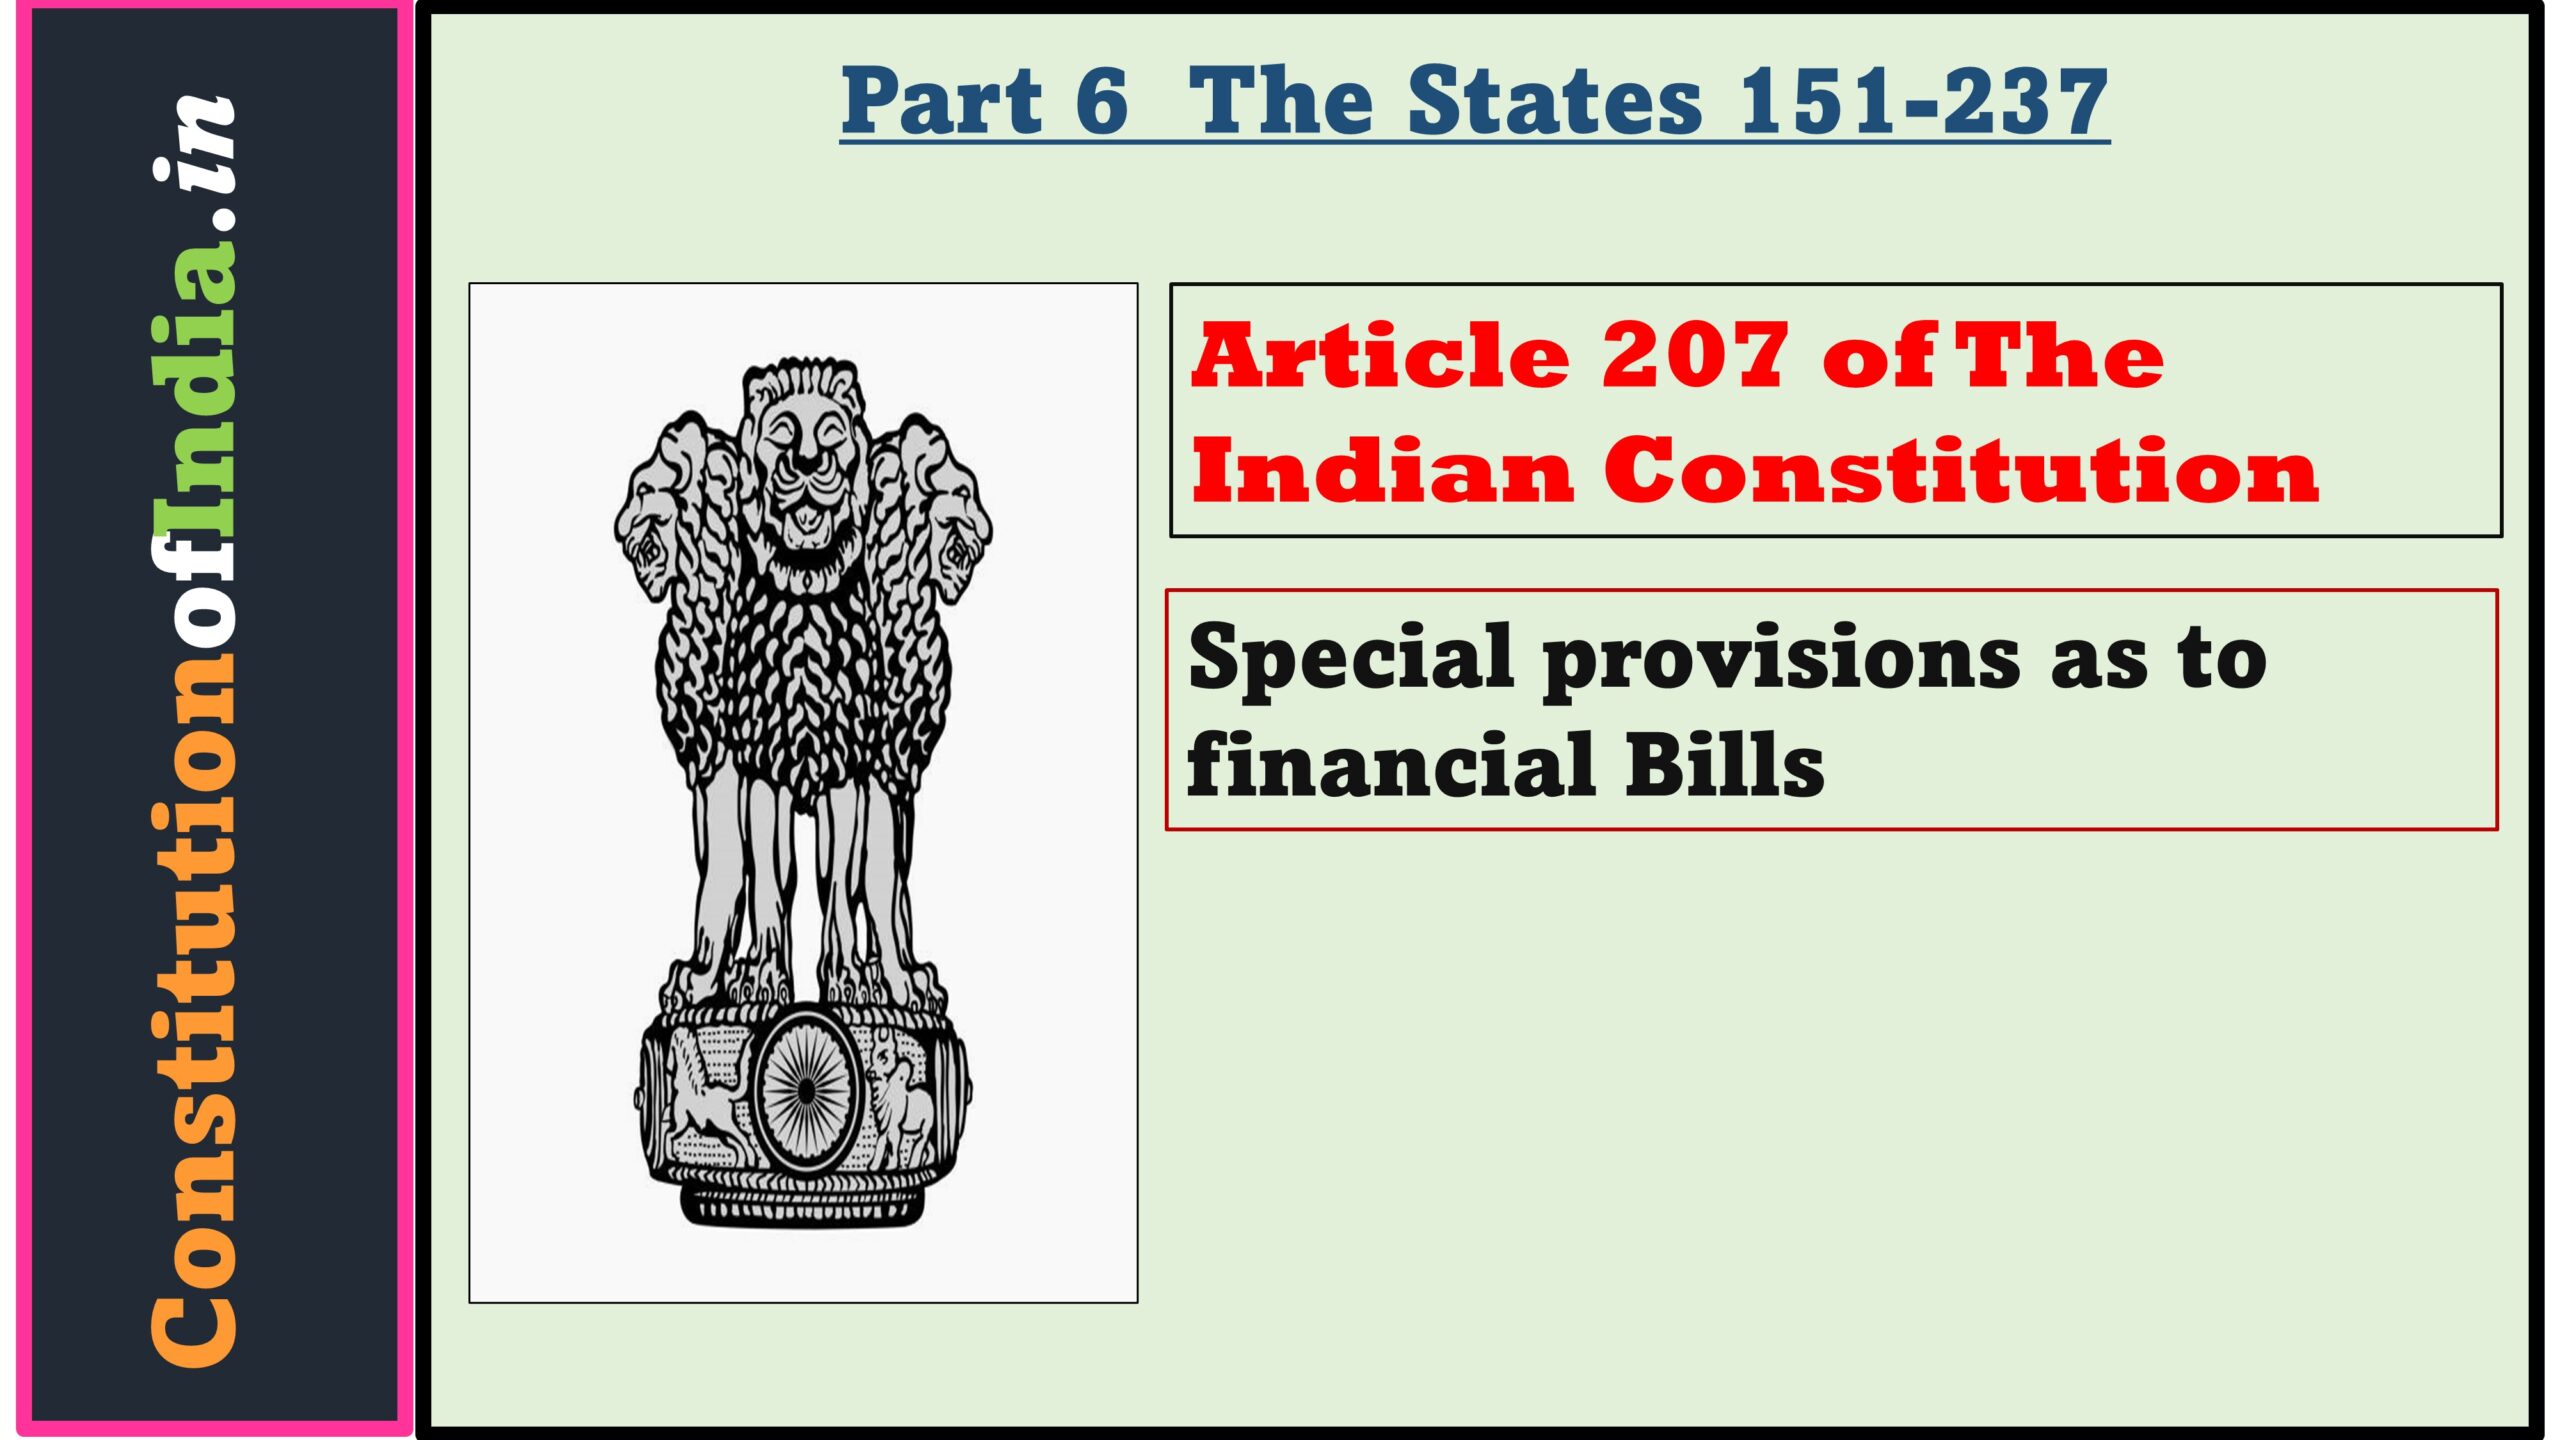 Article 207 of The Indian Constitution